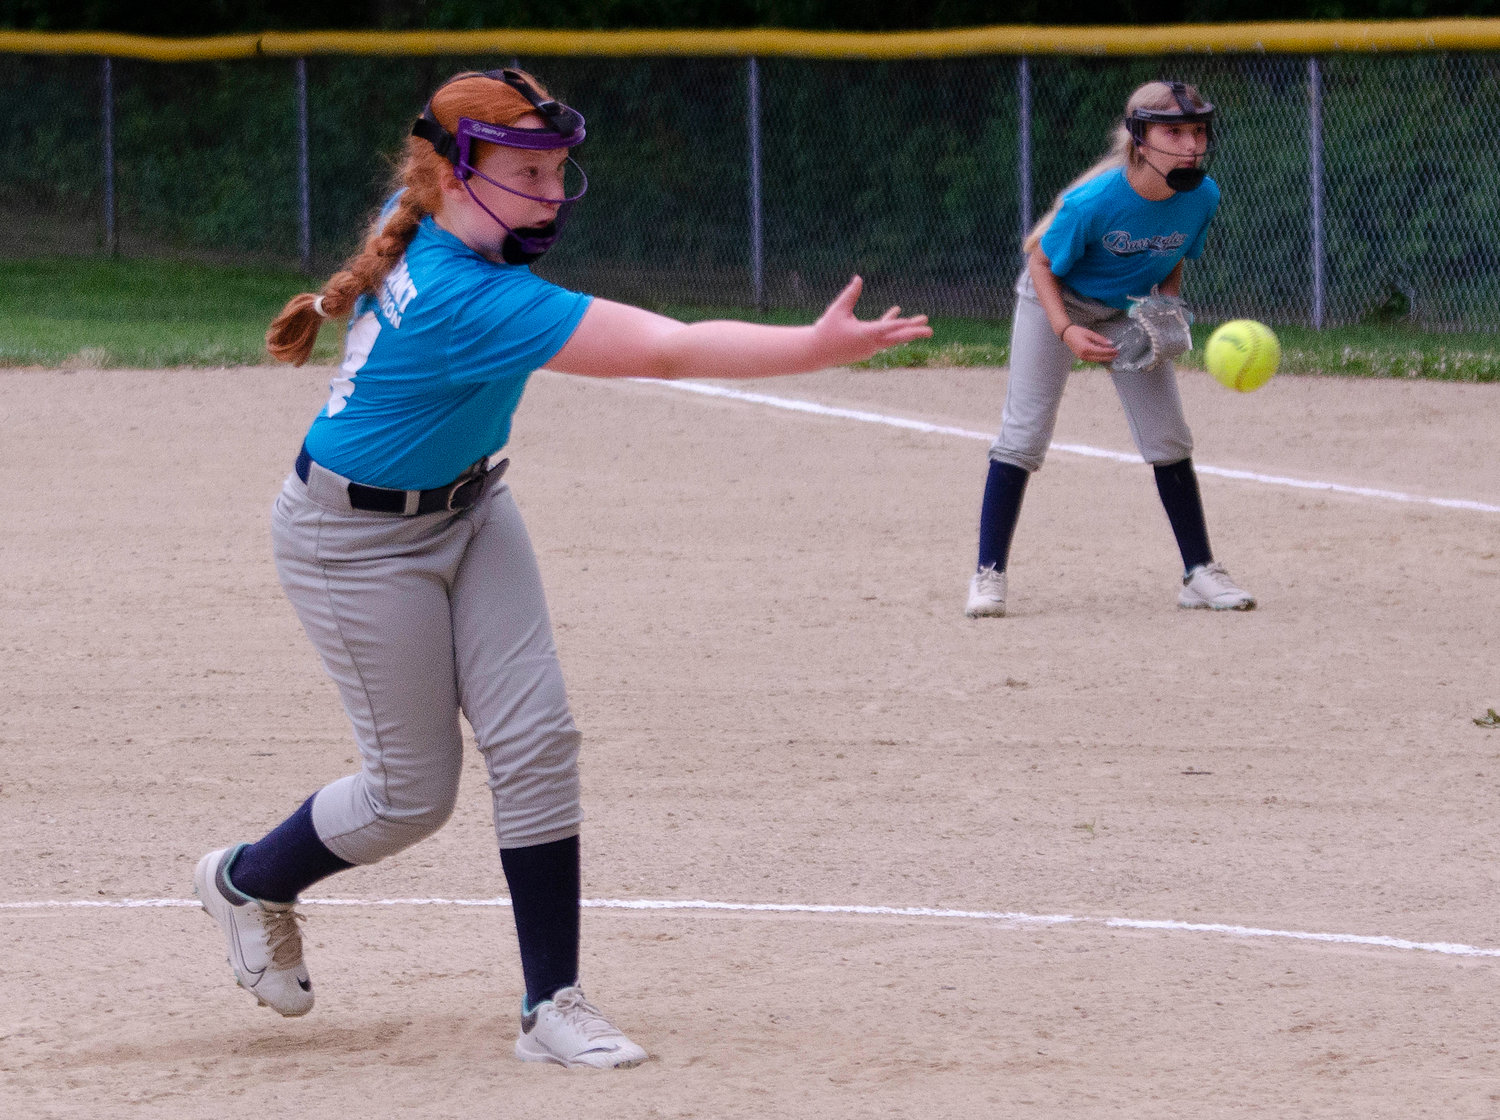 Navigant pitcher Claire Bickford throws a strike during the Barrington Little League softball minors division championship game at Haines Park recently.